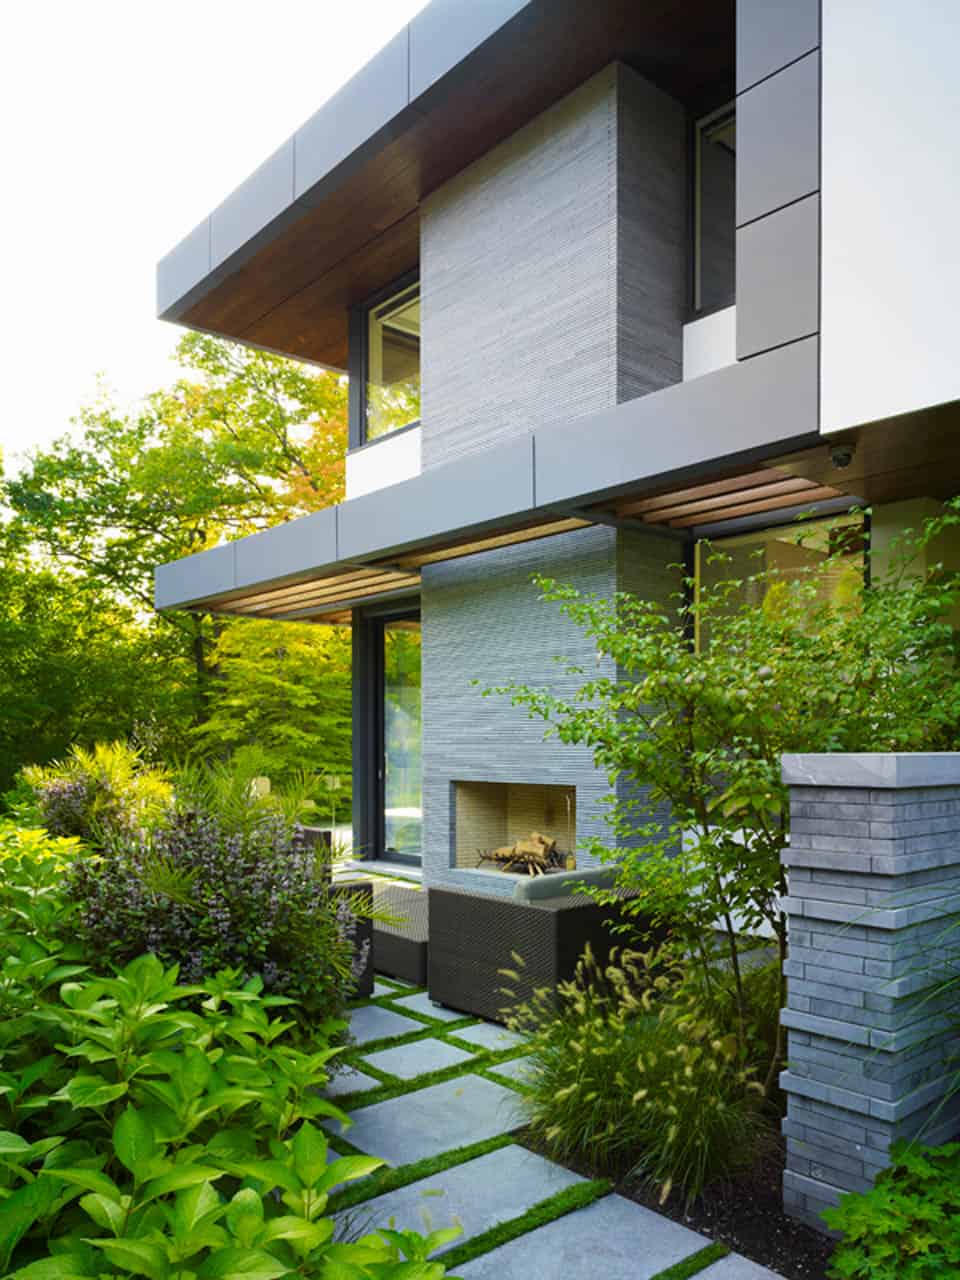 stunning details large open spaces define toronto home 19 outdoors